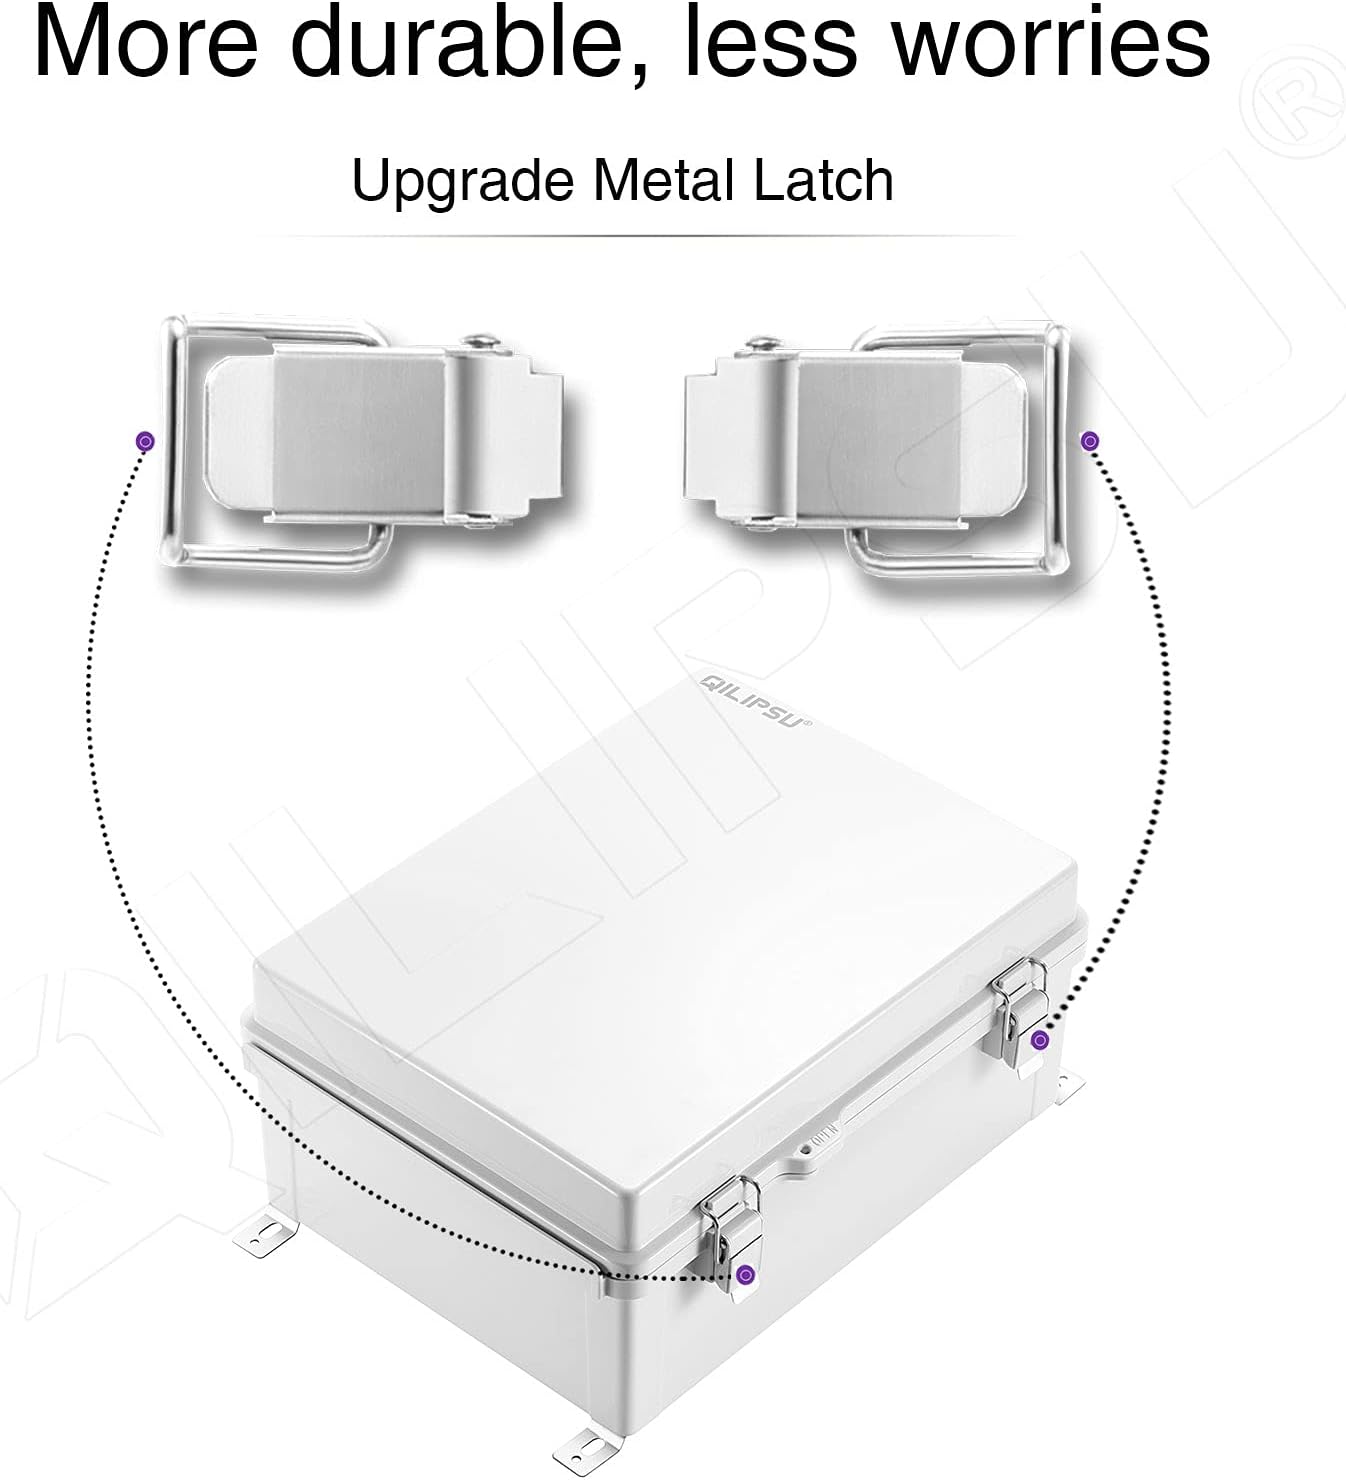 YUEQING QILI ELECTRICAL CO.,LT QILIPSU Hinged Cover Stainless Steel Latch 370x270x150mm Junction Box with Mounting Plate, ABS Plastic DIY Electrical Project C